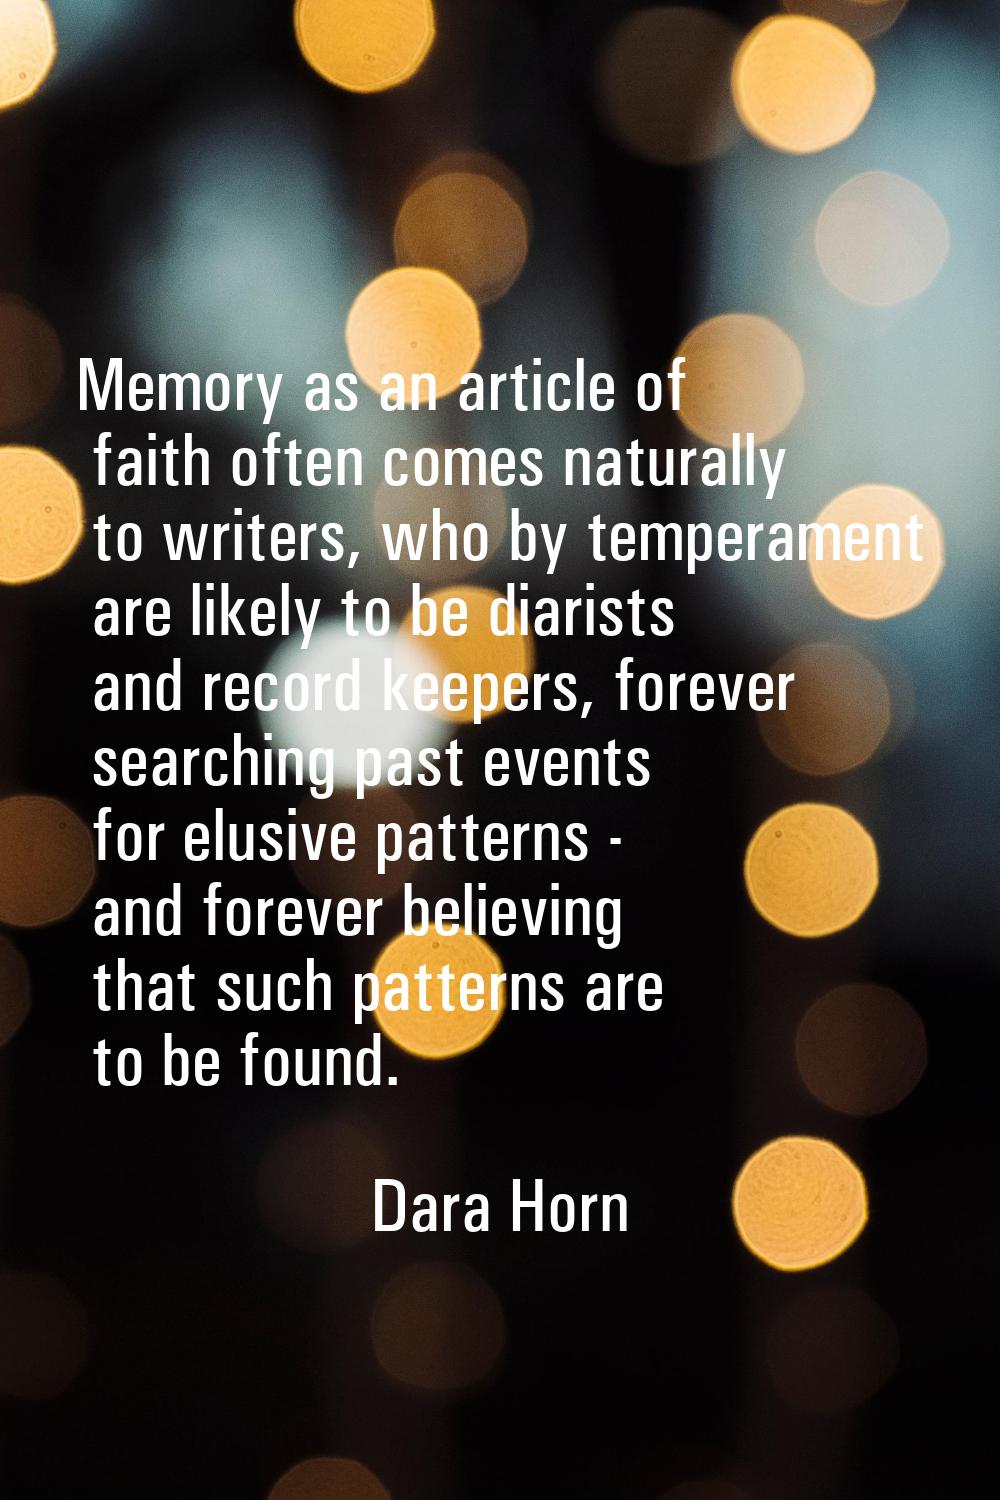 Memory as an article of faith often comes naturally to writers, who by temperament are likely to be